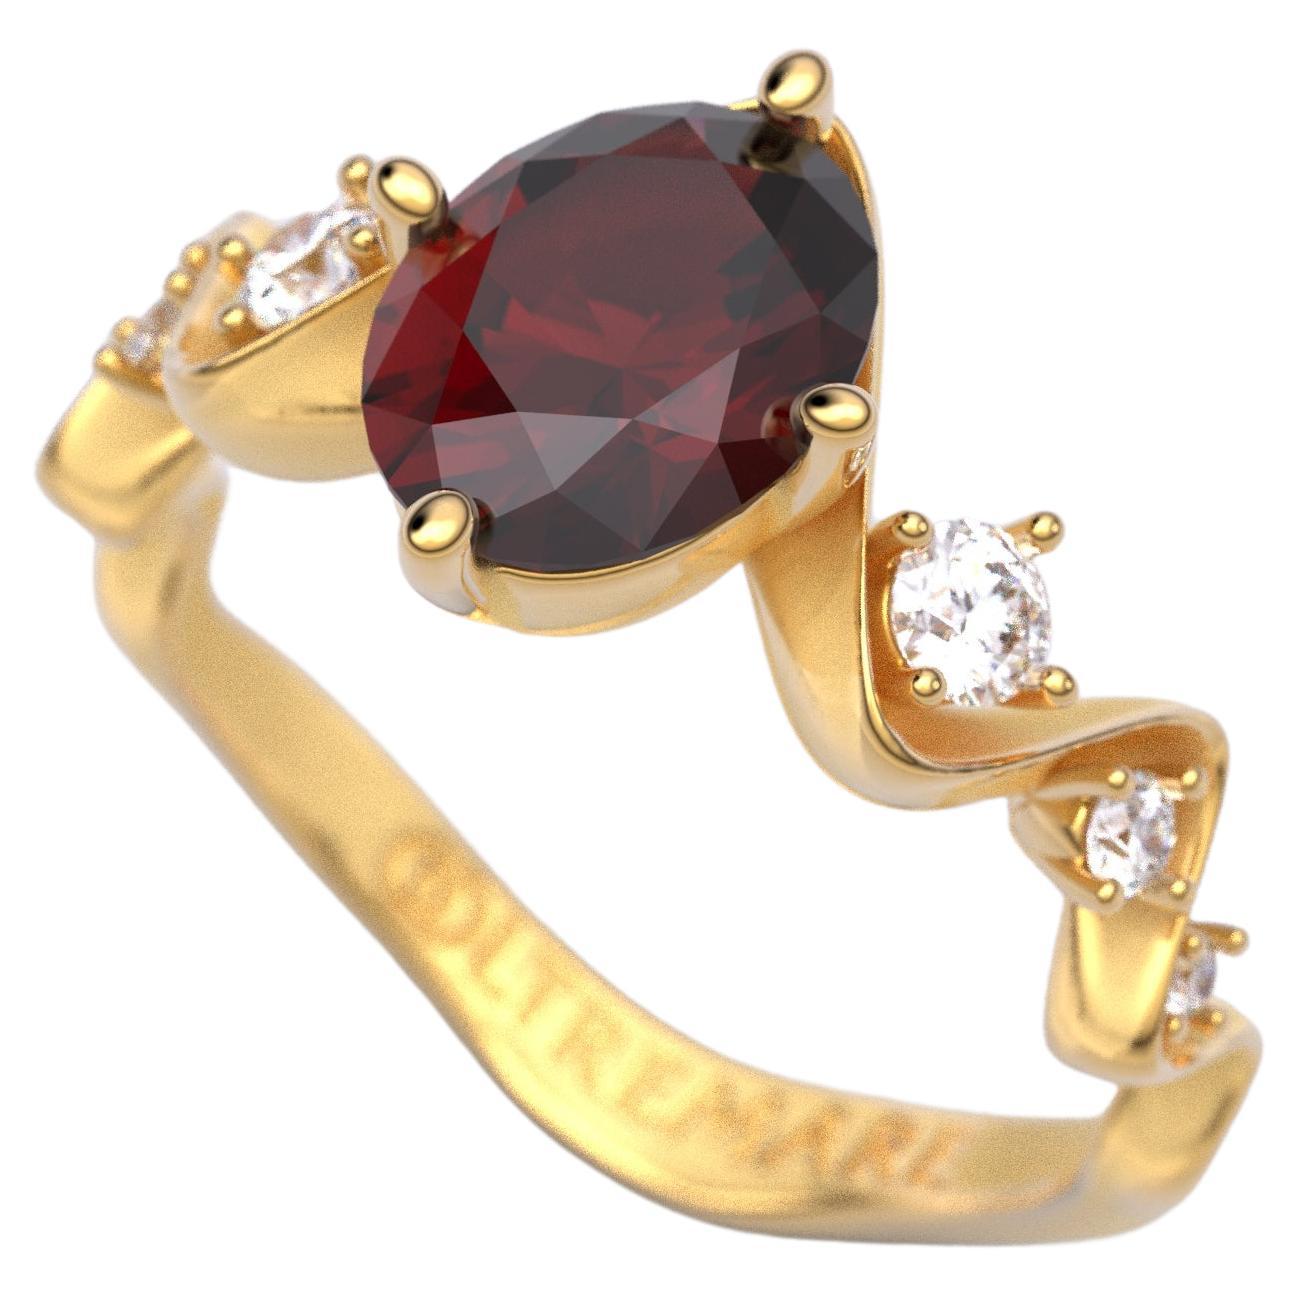 For Sale:  Natural Garnet and Diamonds Italian 14k Gold Engagement Ring, Oltremare Gioielli